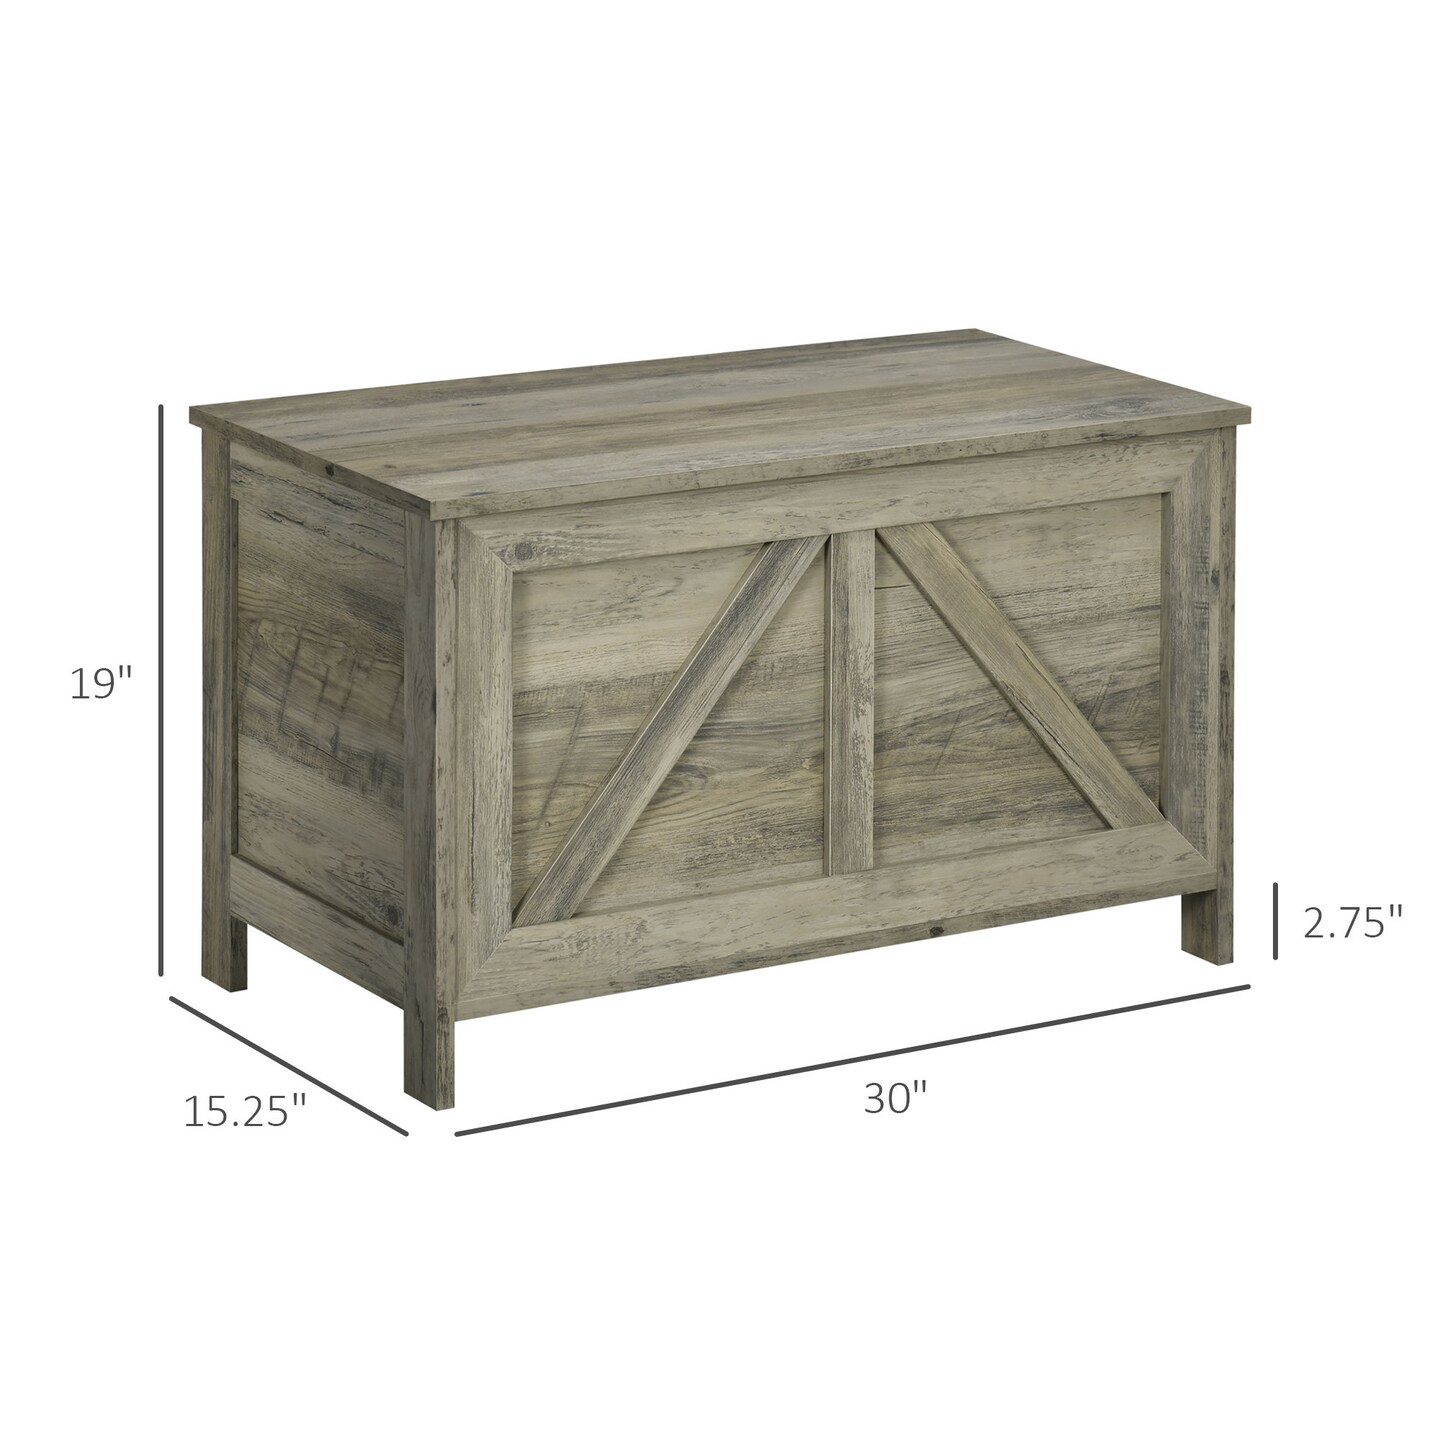 Farmhouse-Style Storage Chest with Lift Top Box Organizer - 30.8 | Organize with Style